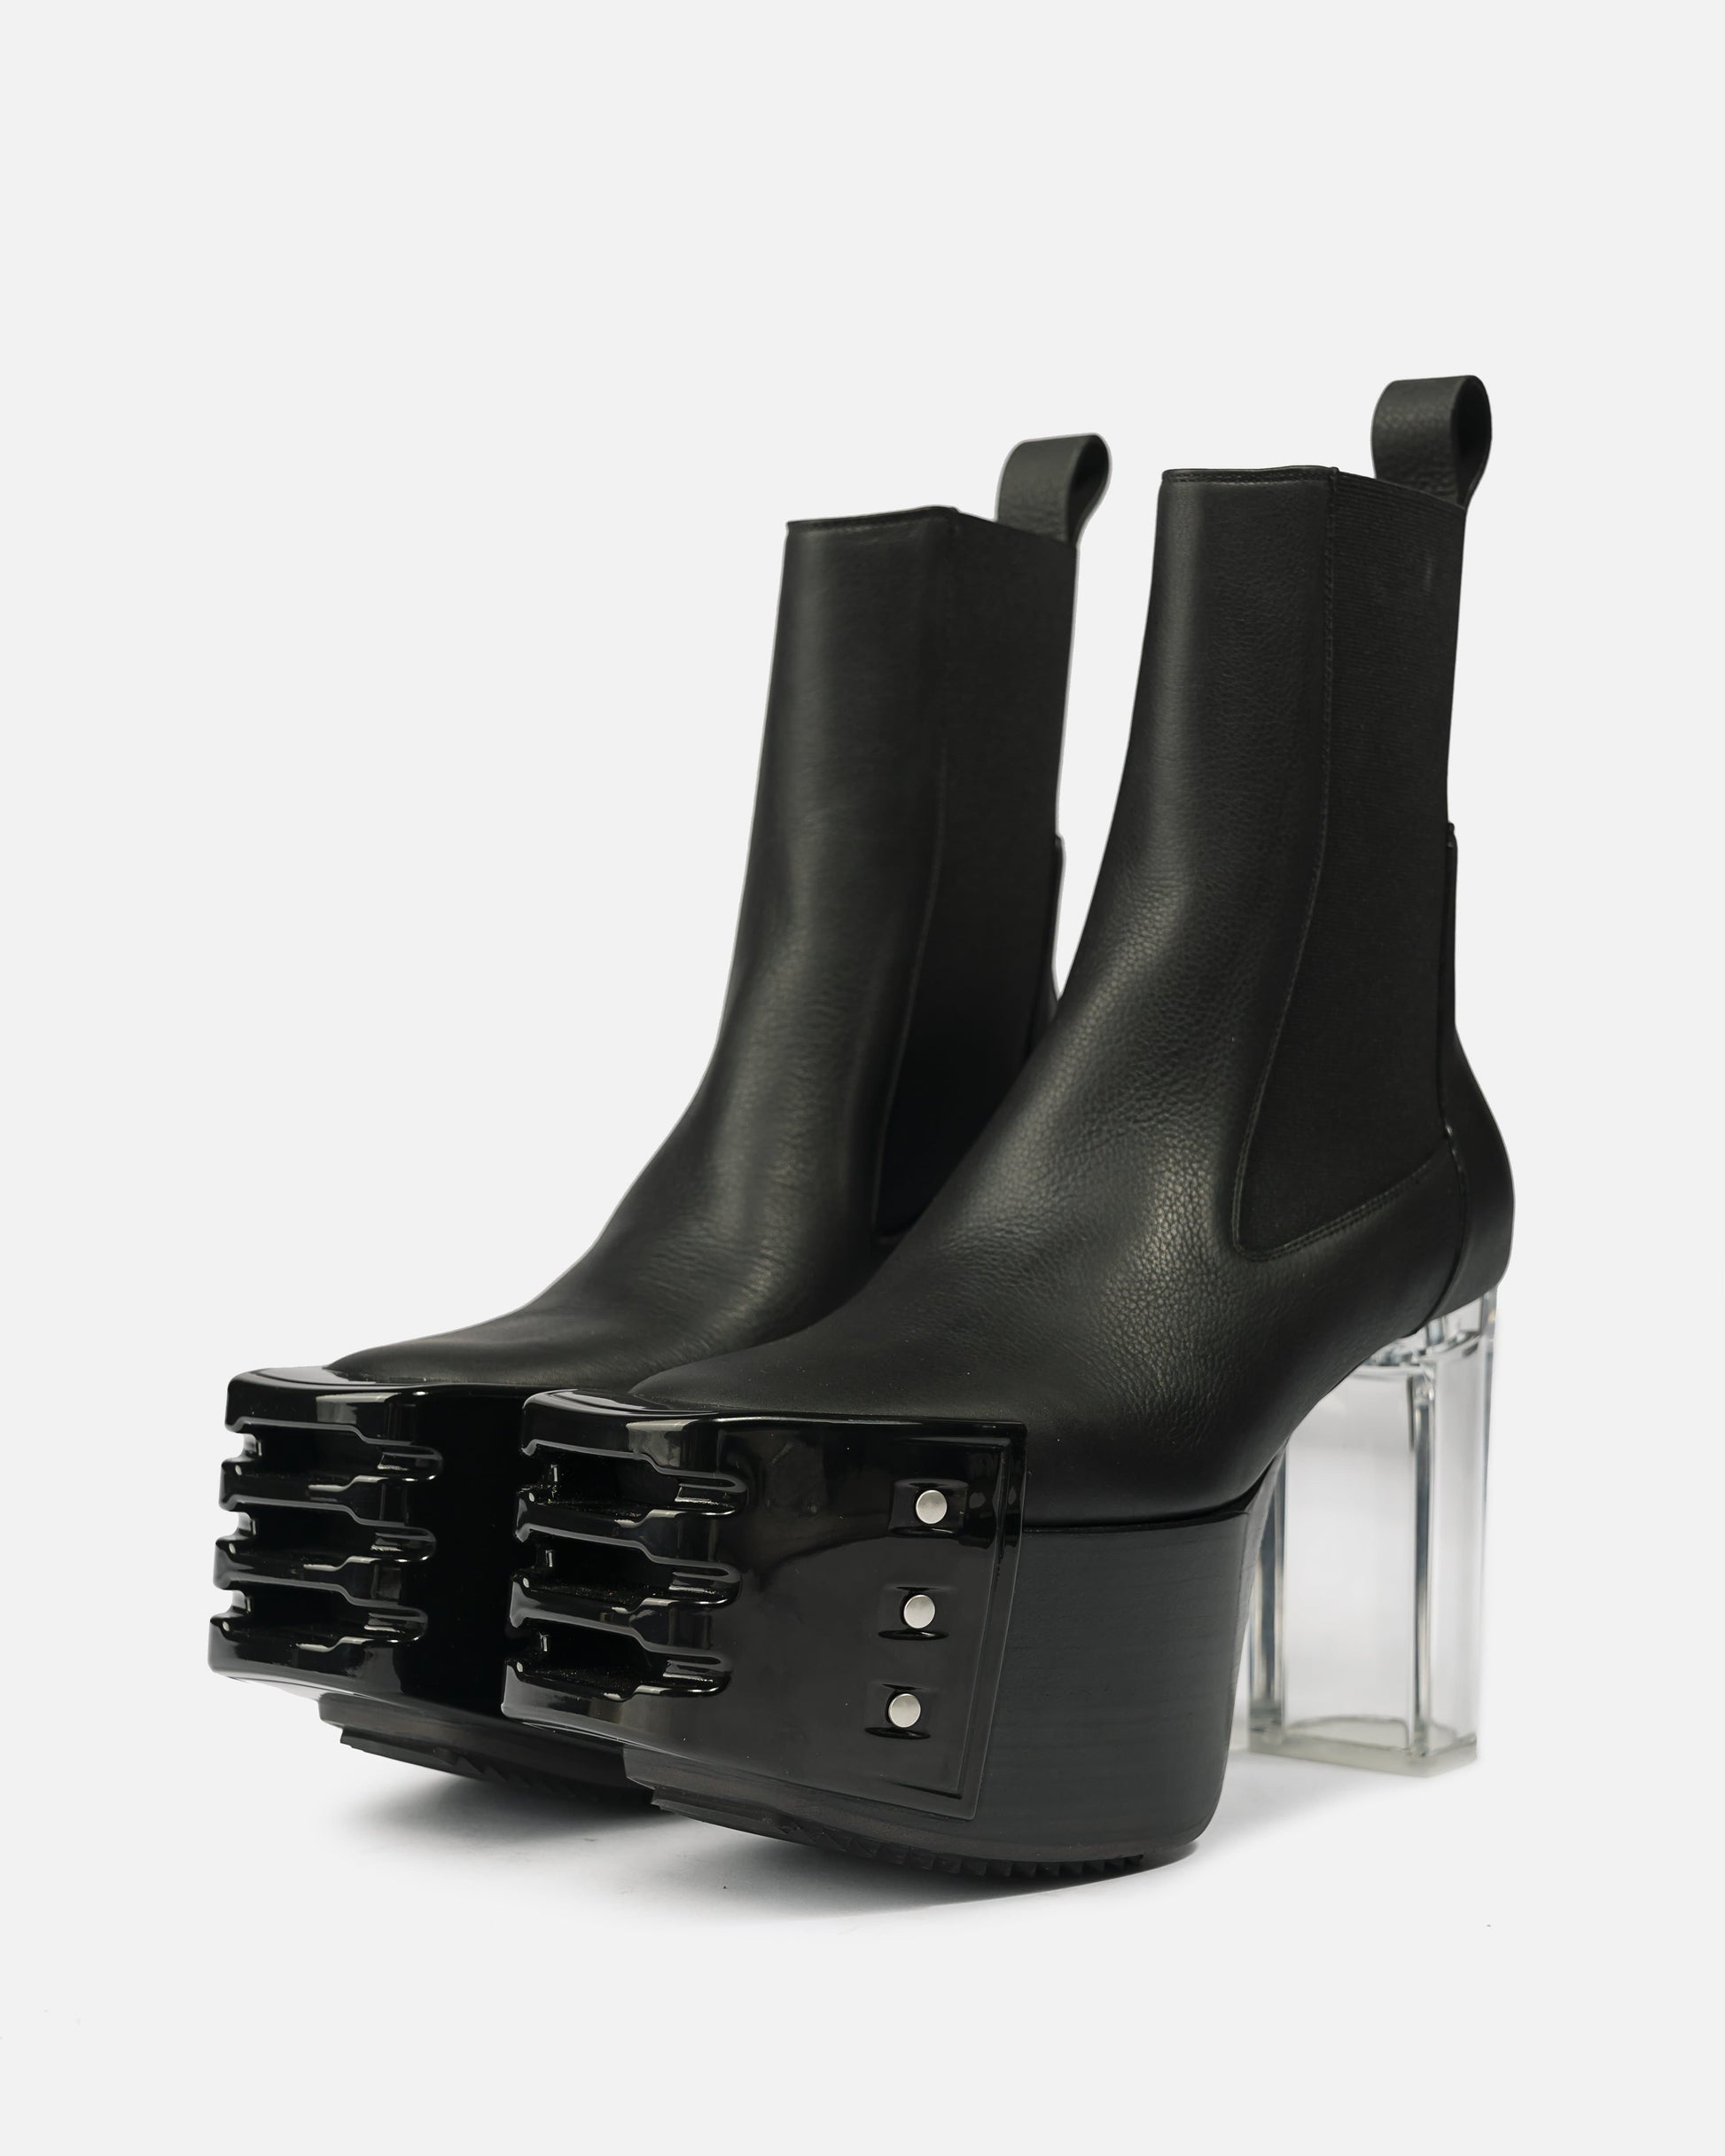 Rick Owens Men's Boots Grilled Kiss Boot in Black/Clear